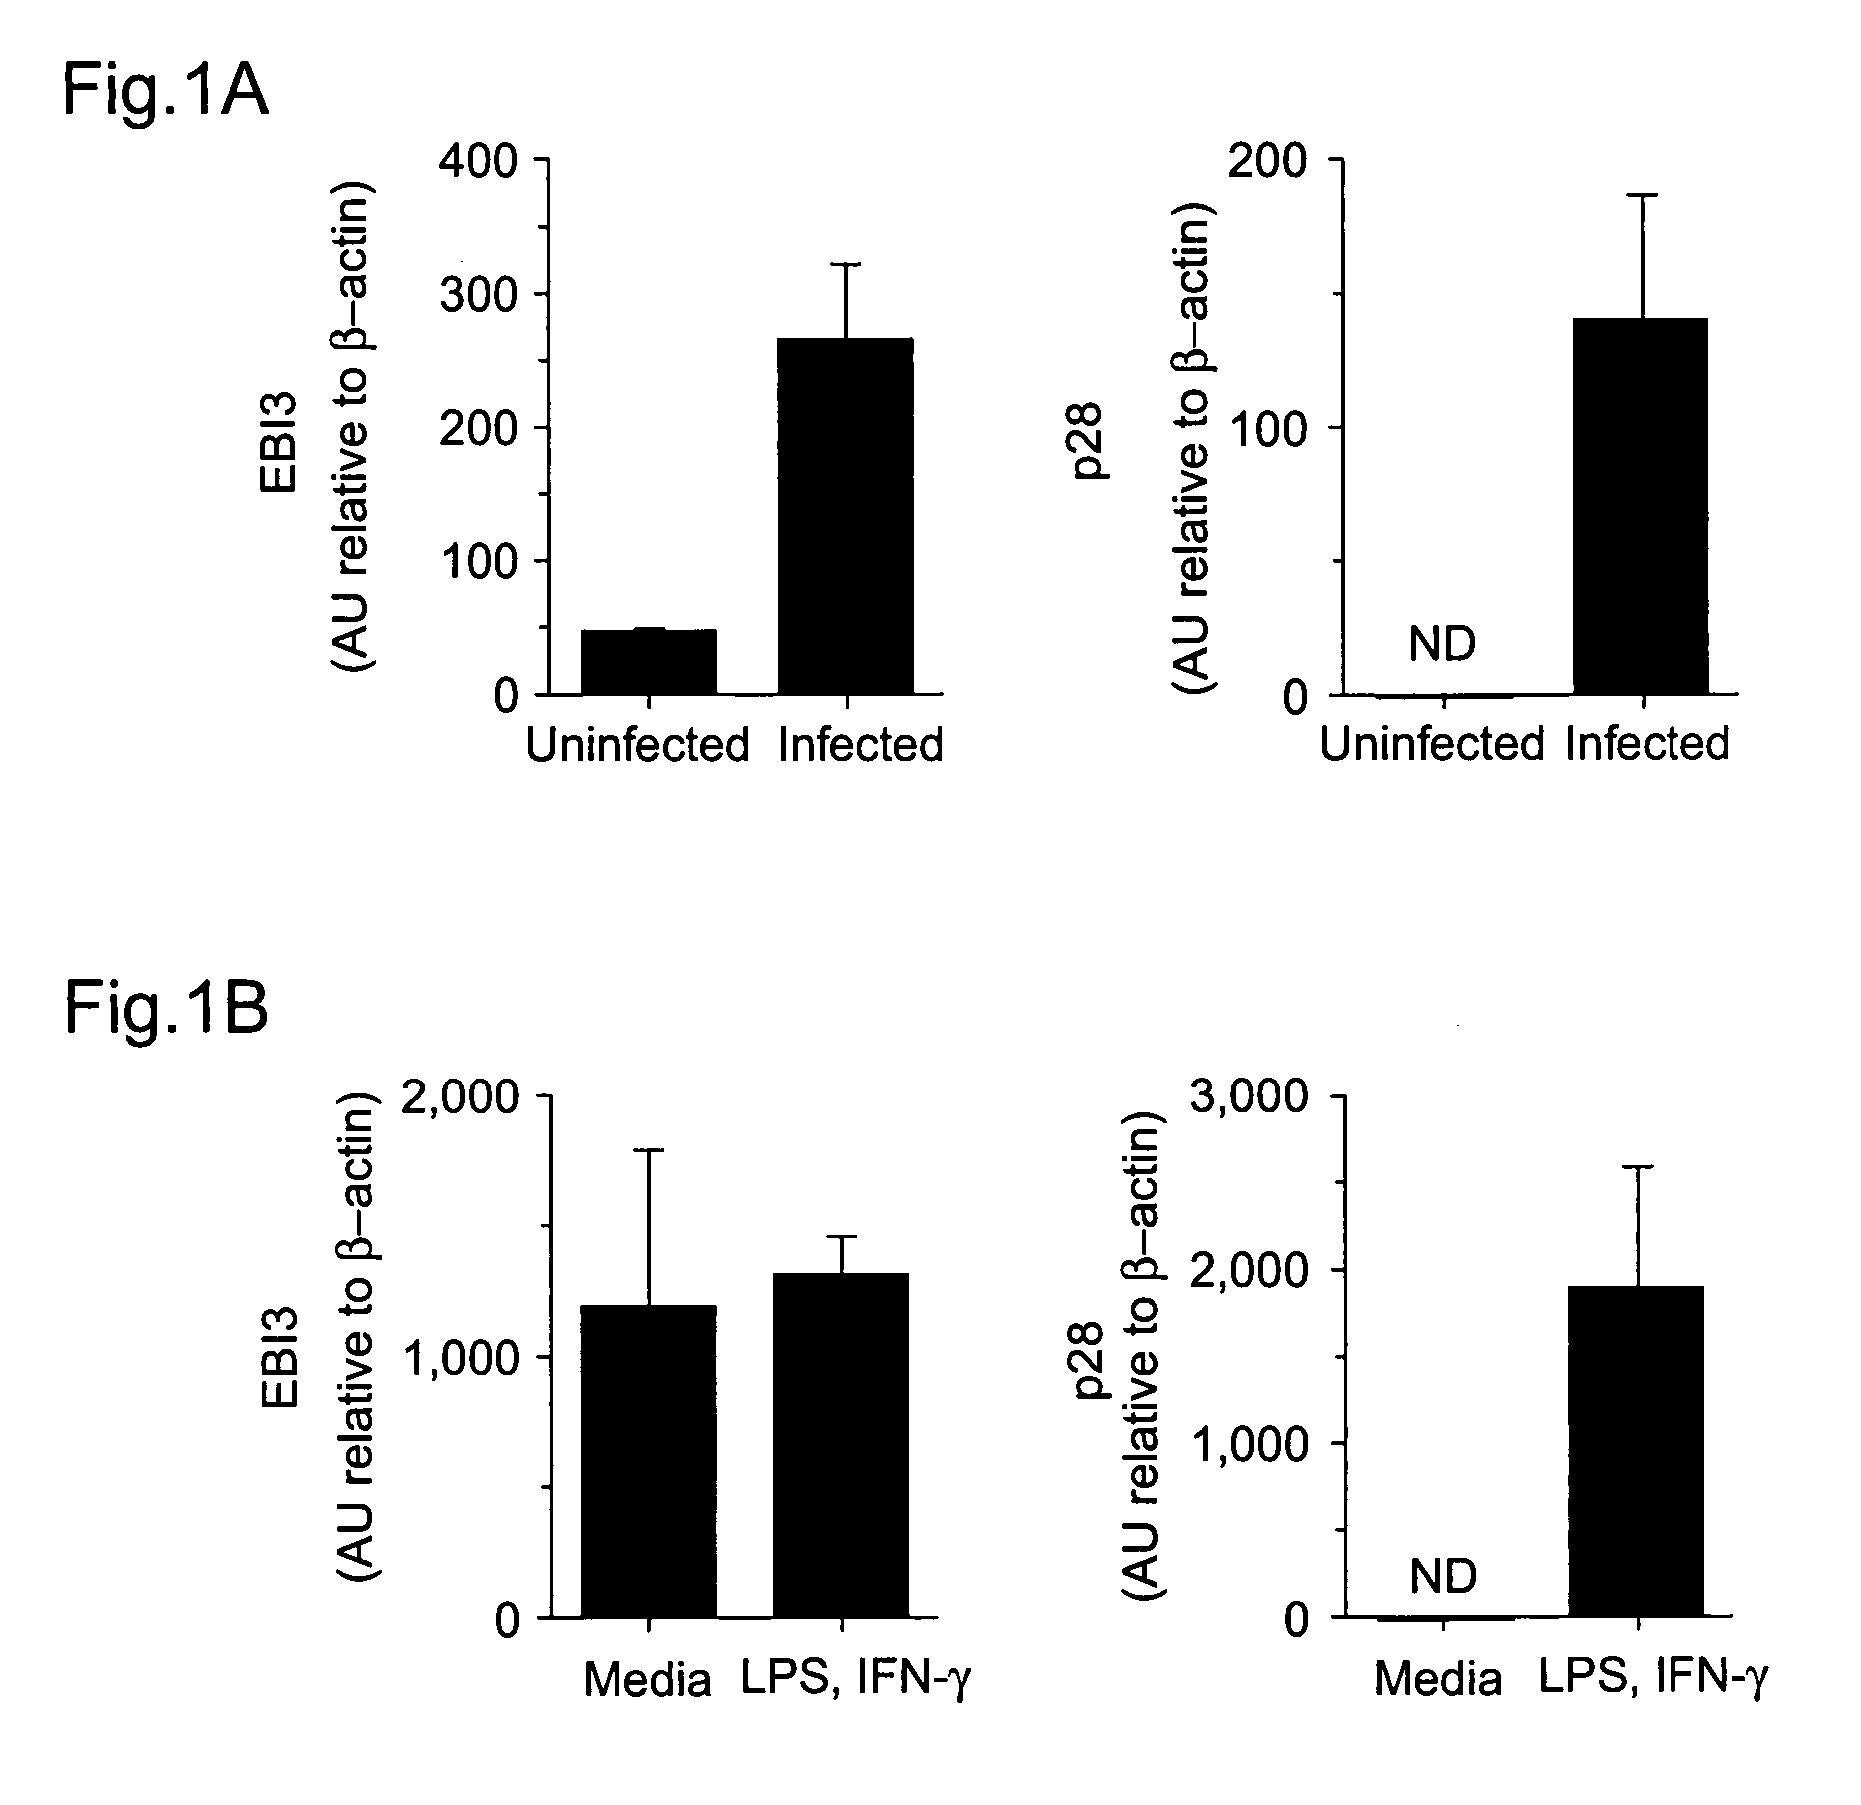 WSX-1/P28 as a target for anti-inflammatory responses